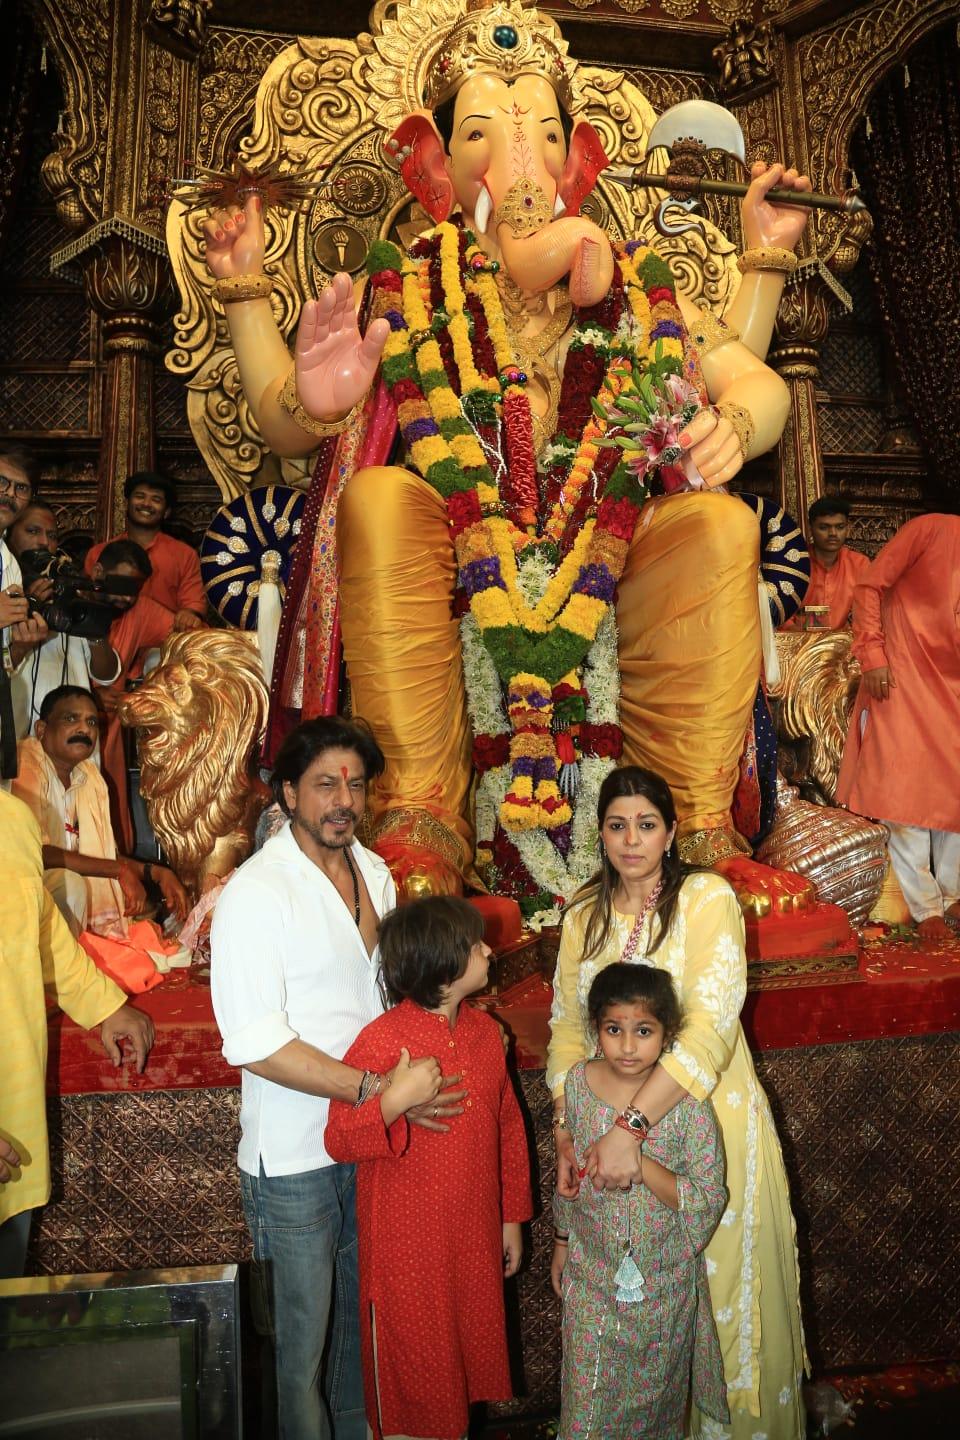 Shah Rukh Khan was seen arriving in a simple white t-shirt and denims and was being guided toward the massive Ganesh idol surrounded by security.